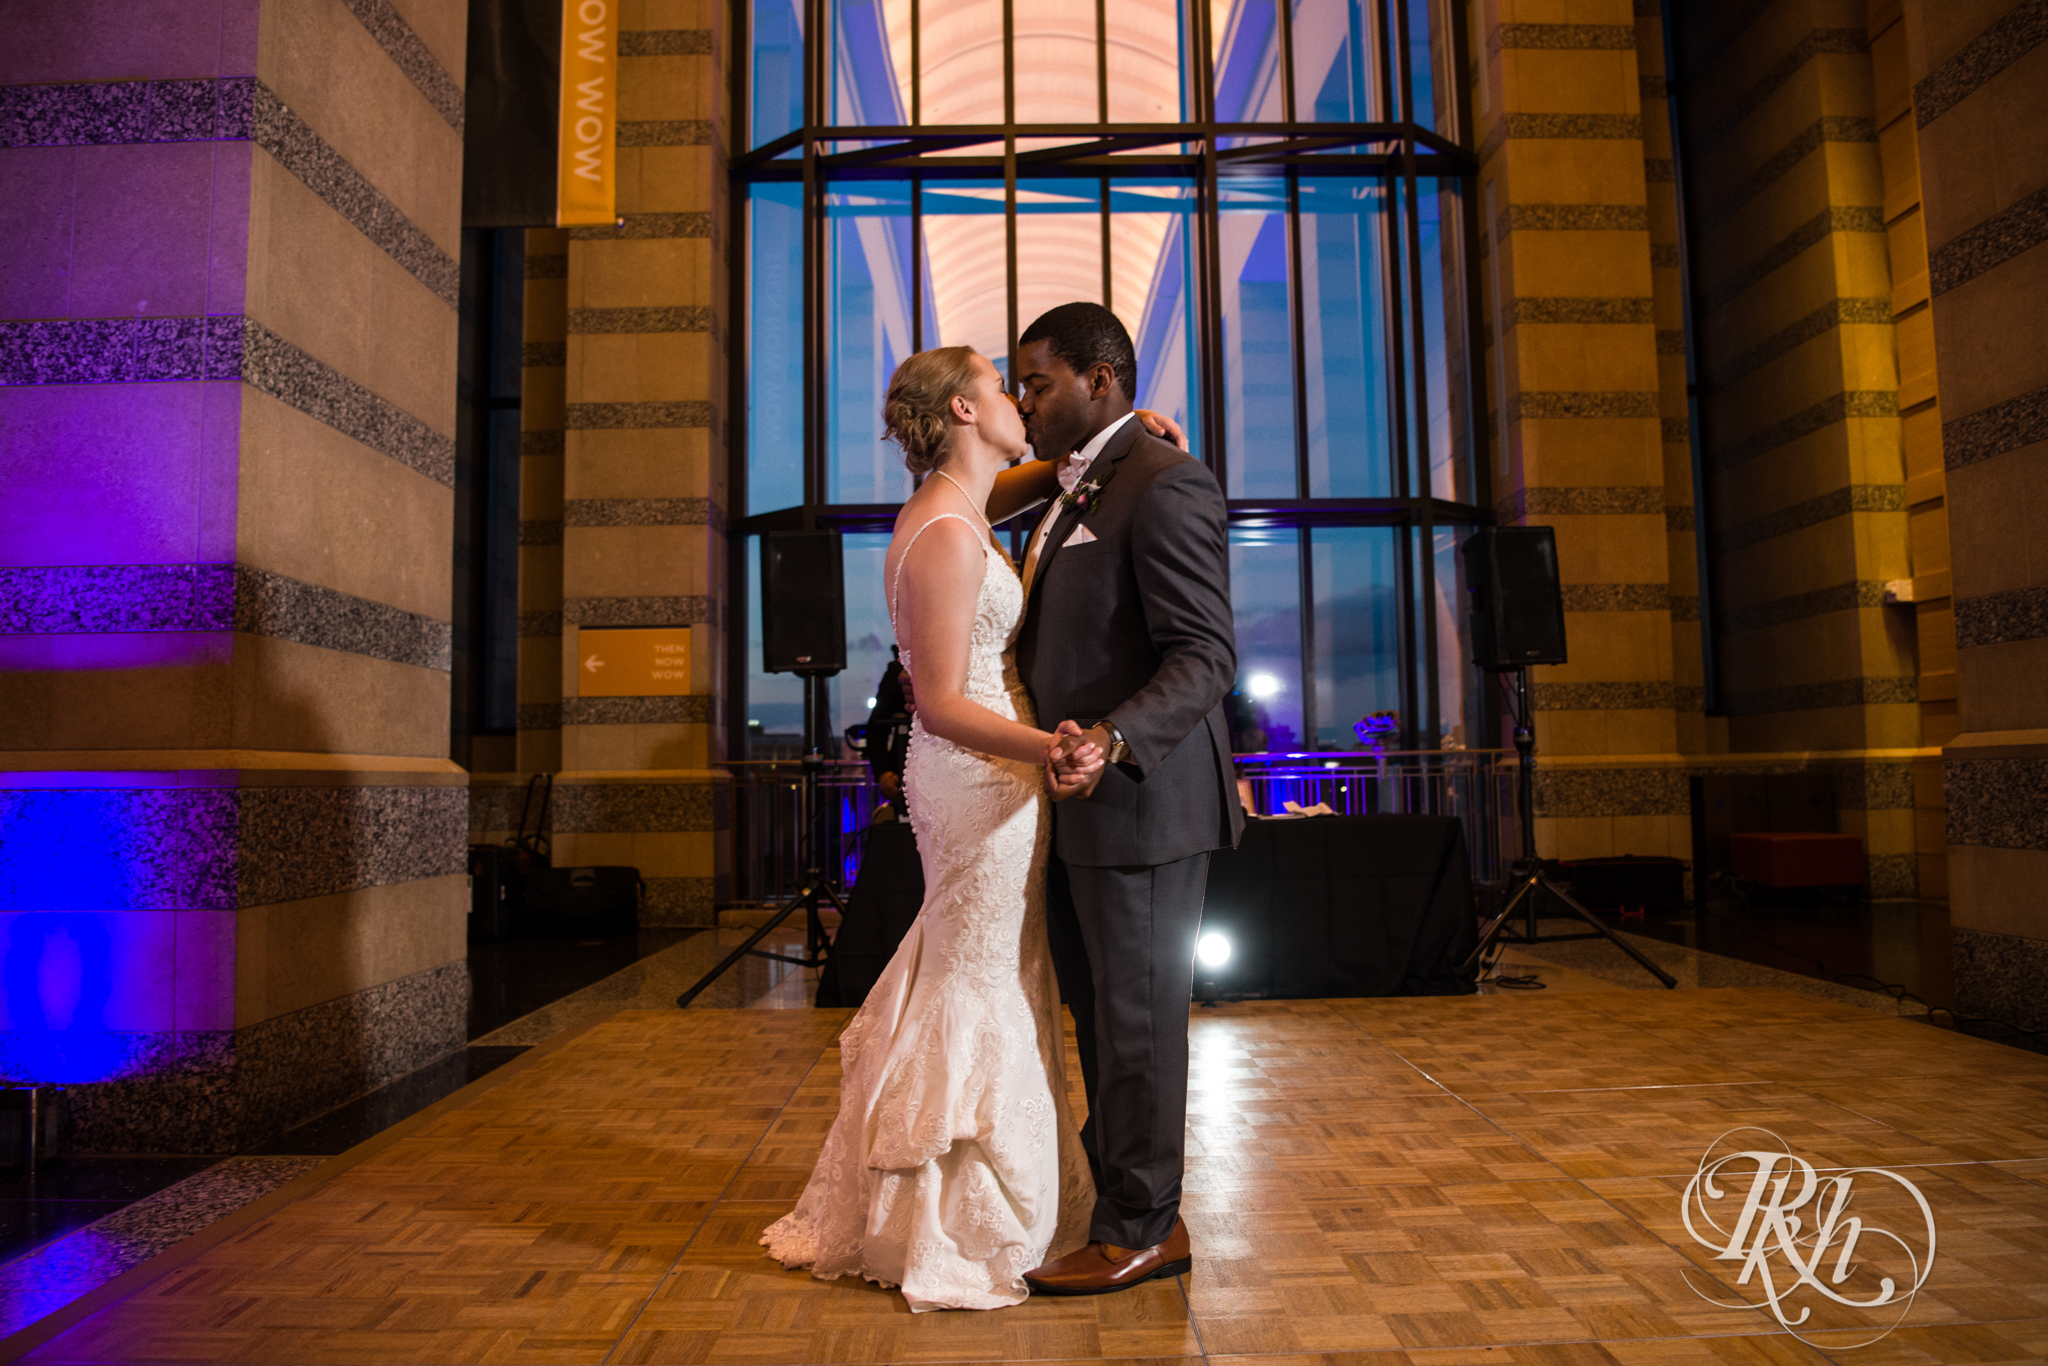 Bride and groom share first dance at Minnesota History Center in Saint Paul, Minnesota.